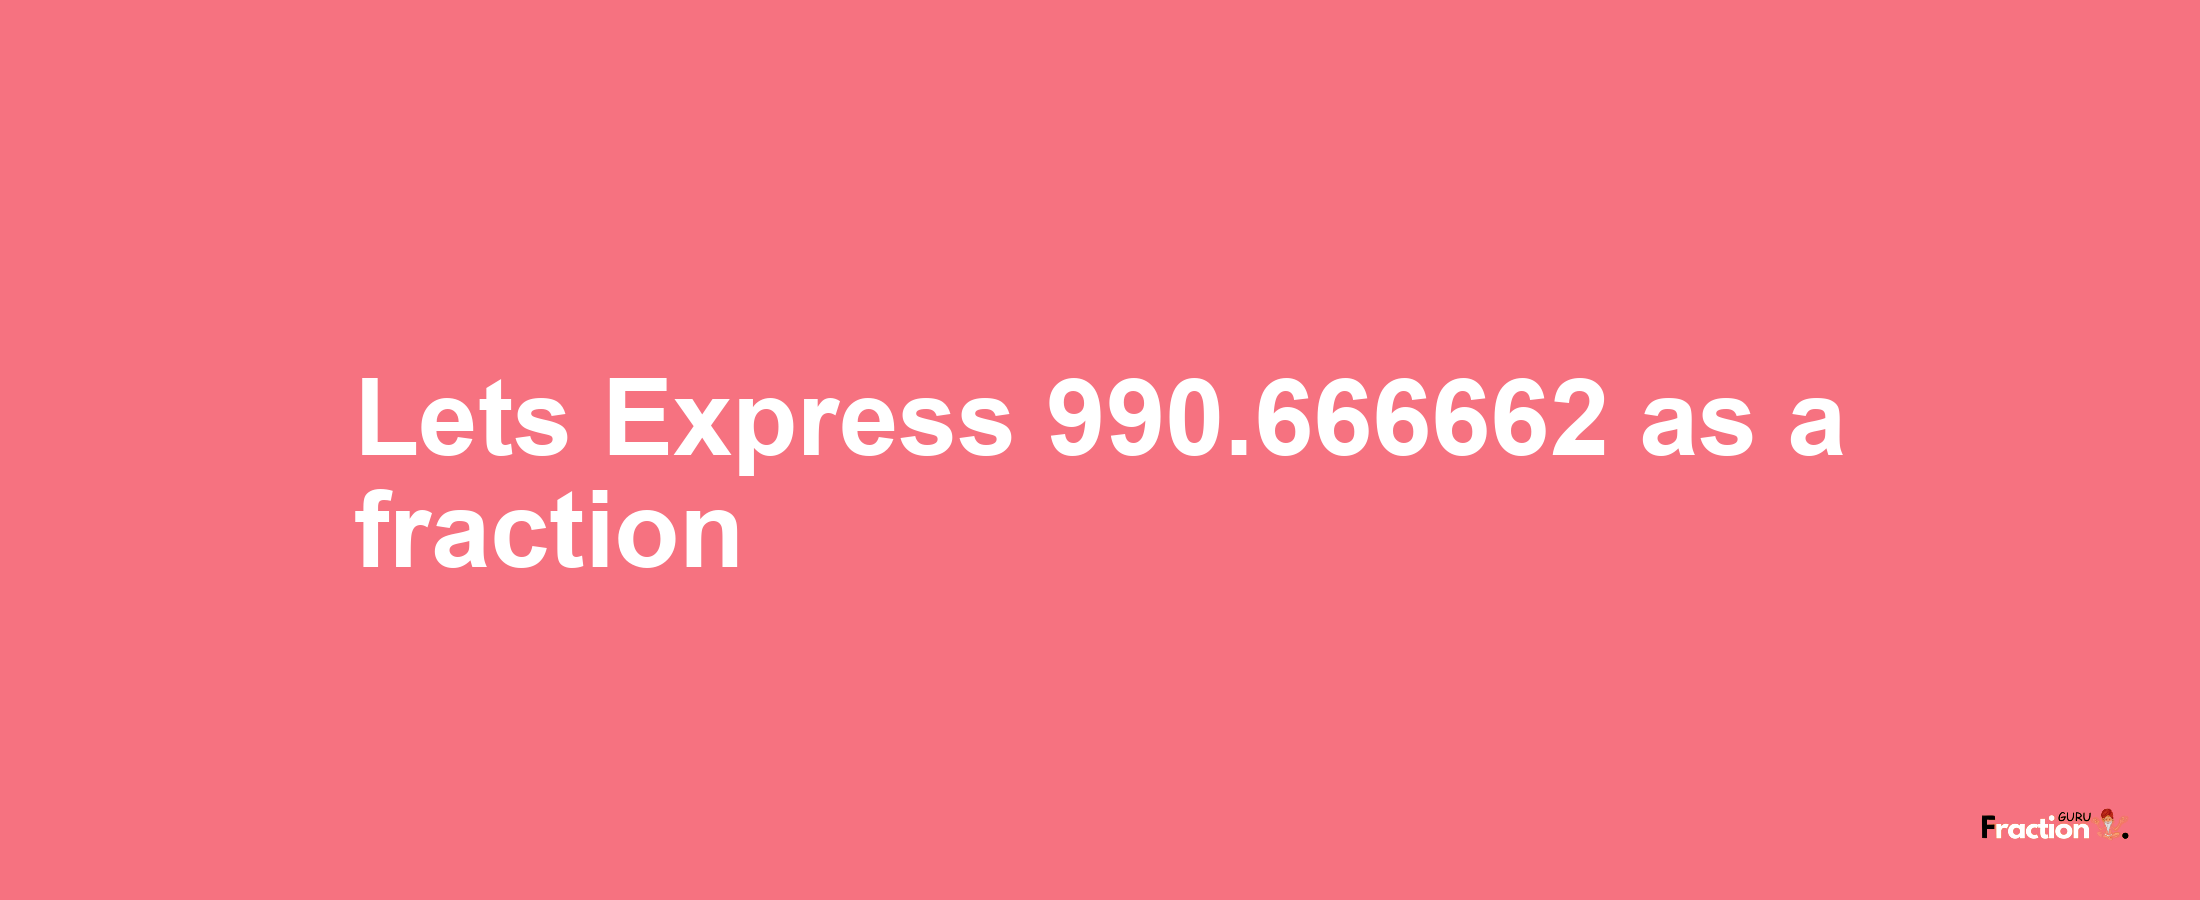 Lets Express 990.666662 as afraction